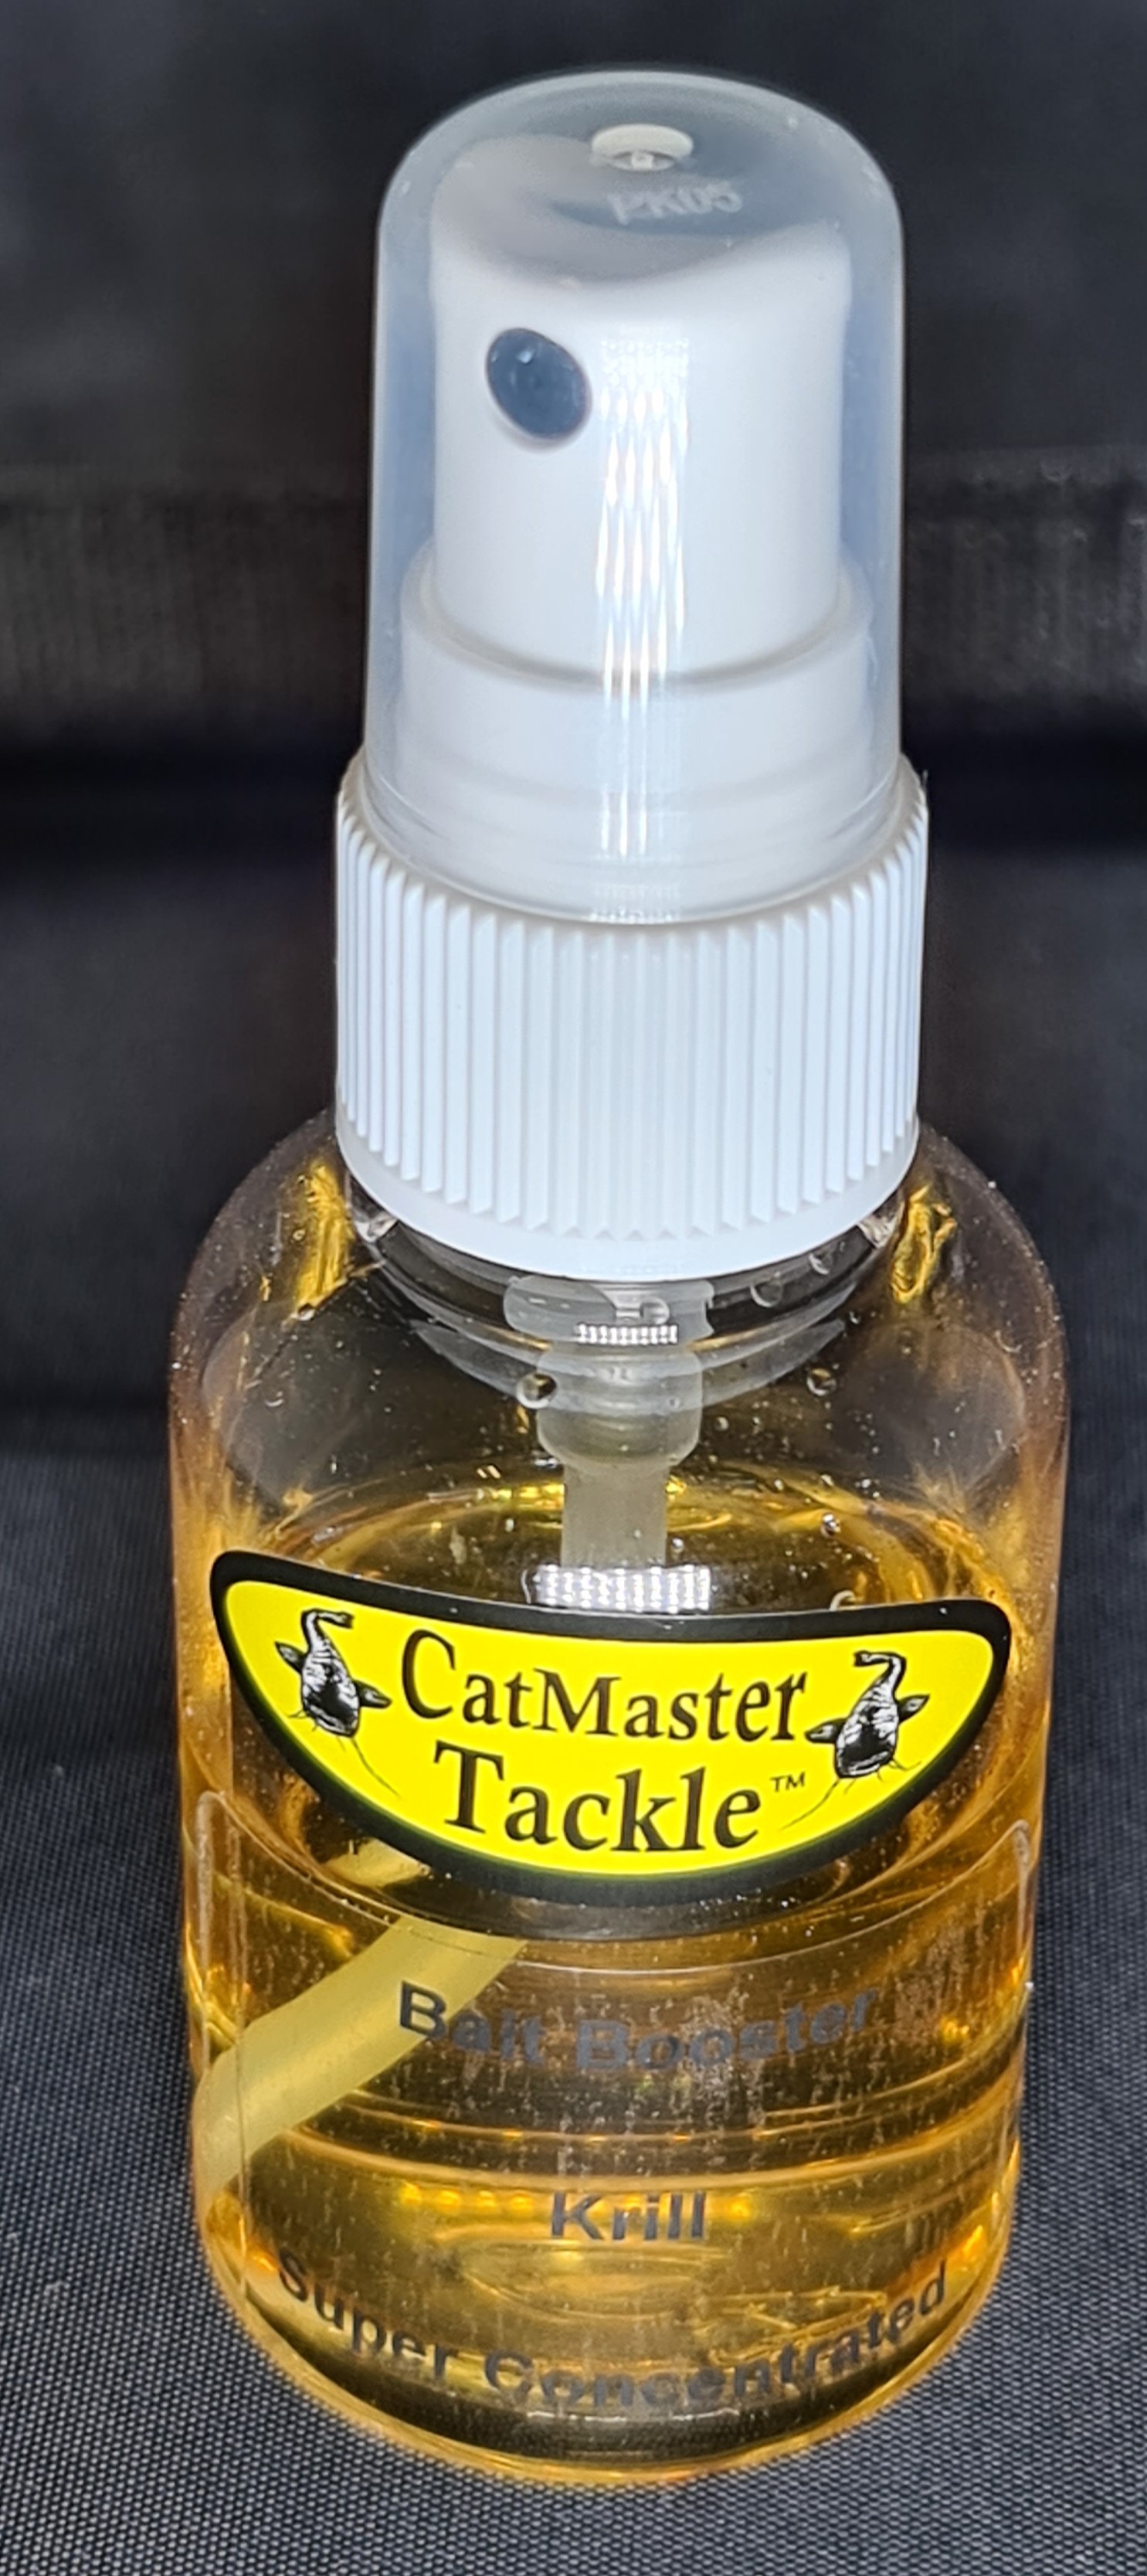 CatMaster Tackle Bait Booster Krill